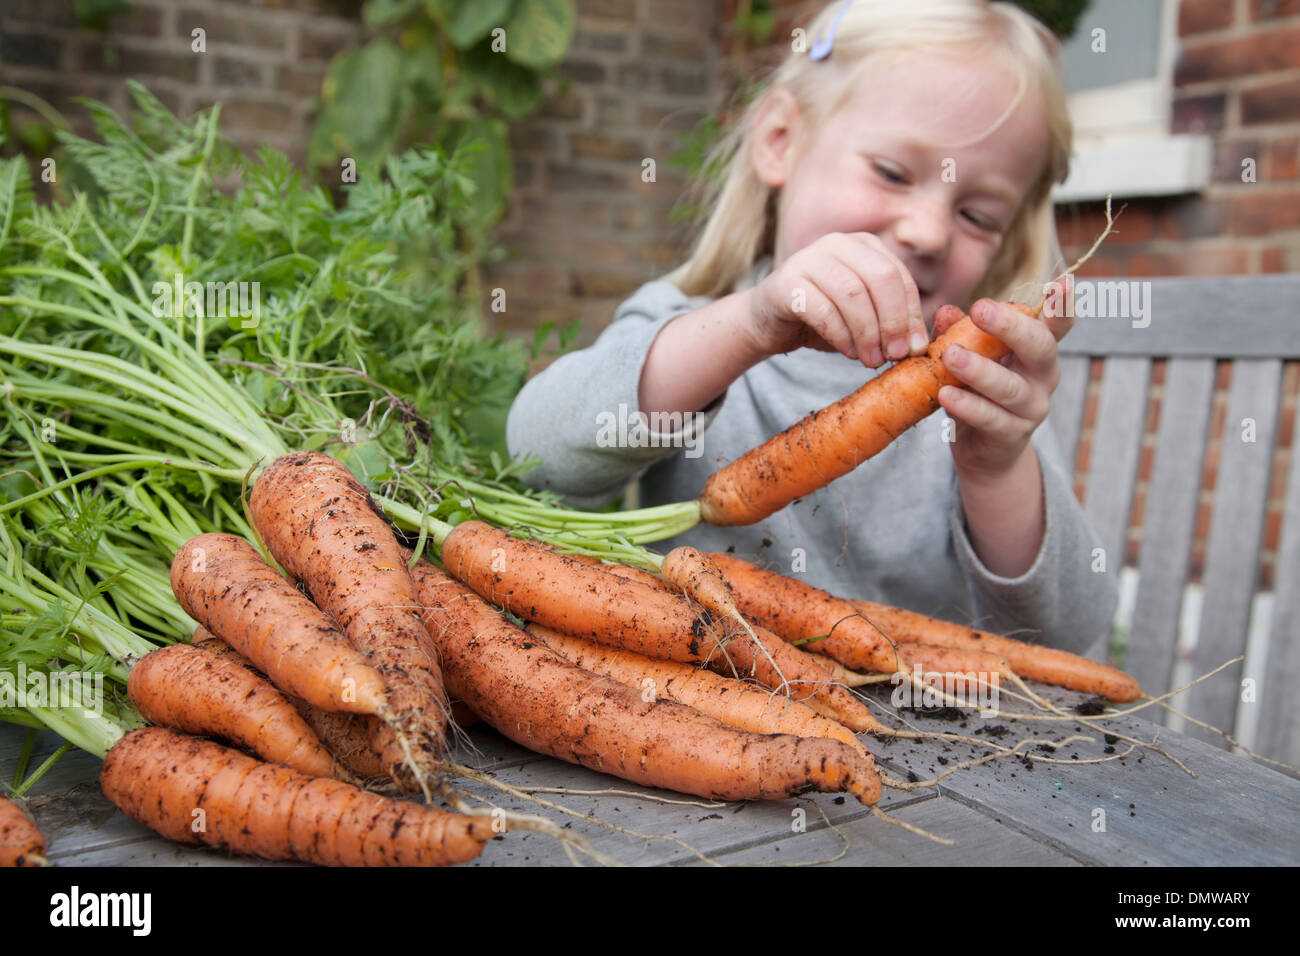 A child inspecting freshly picked carrots with mud on m. Stock Photo